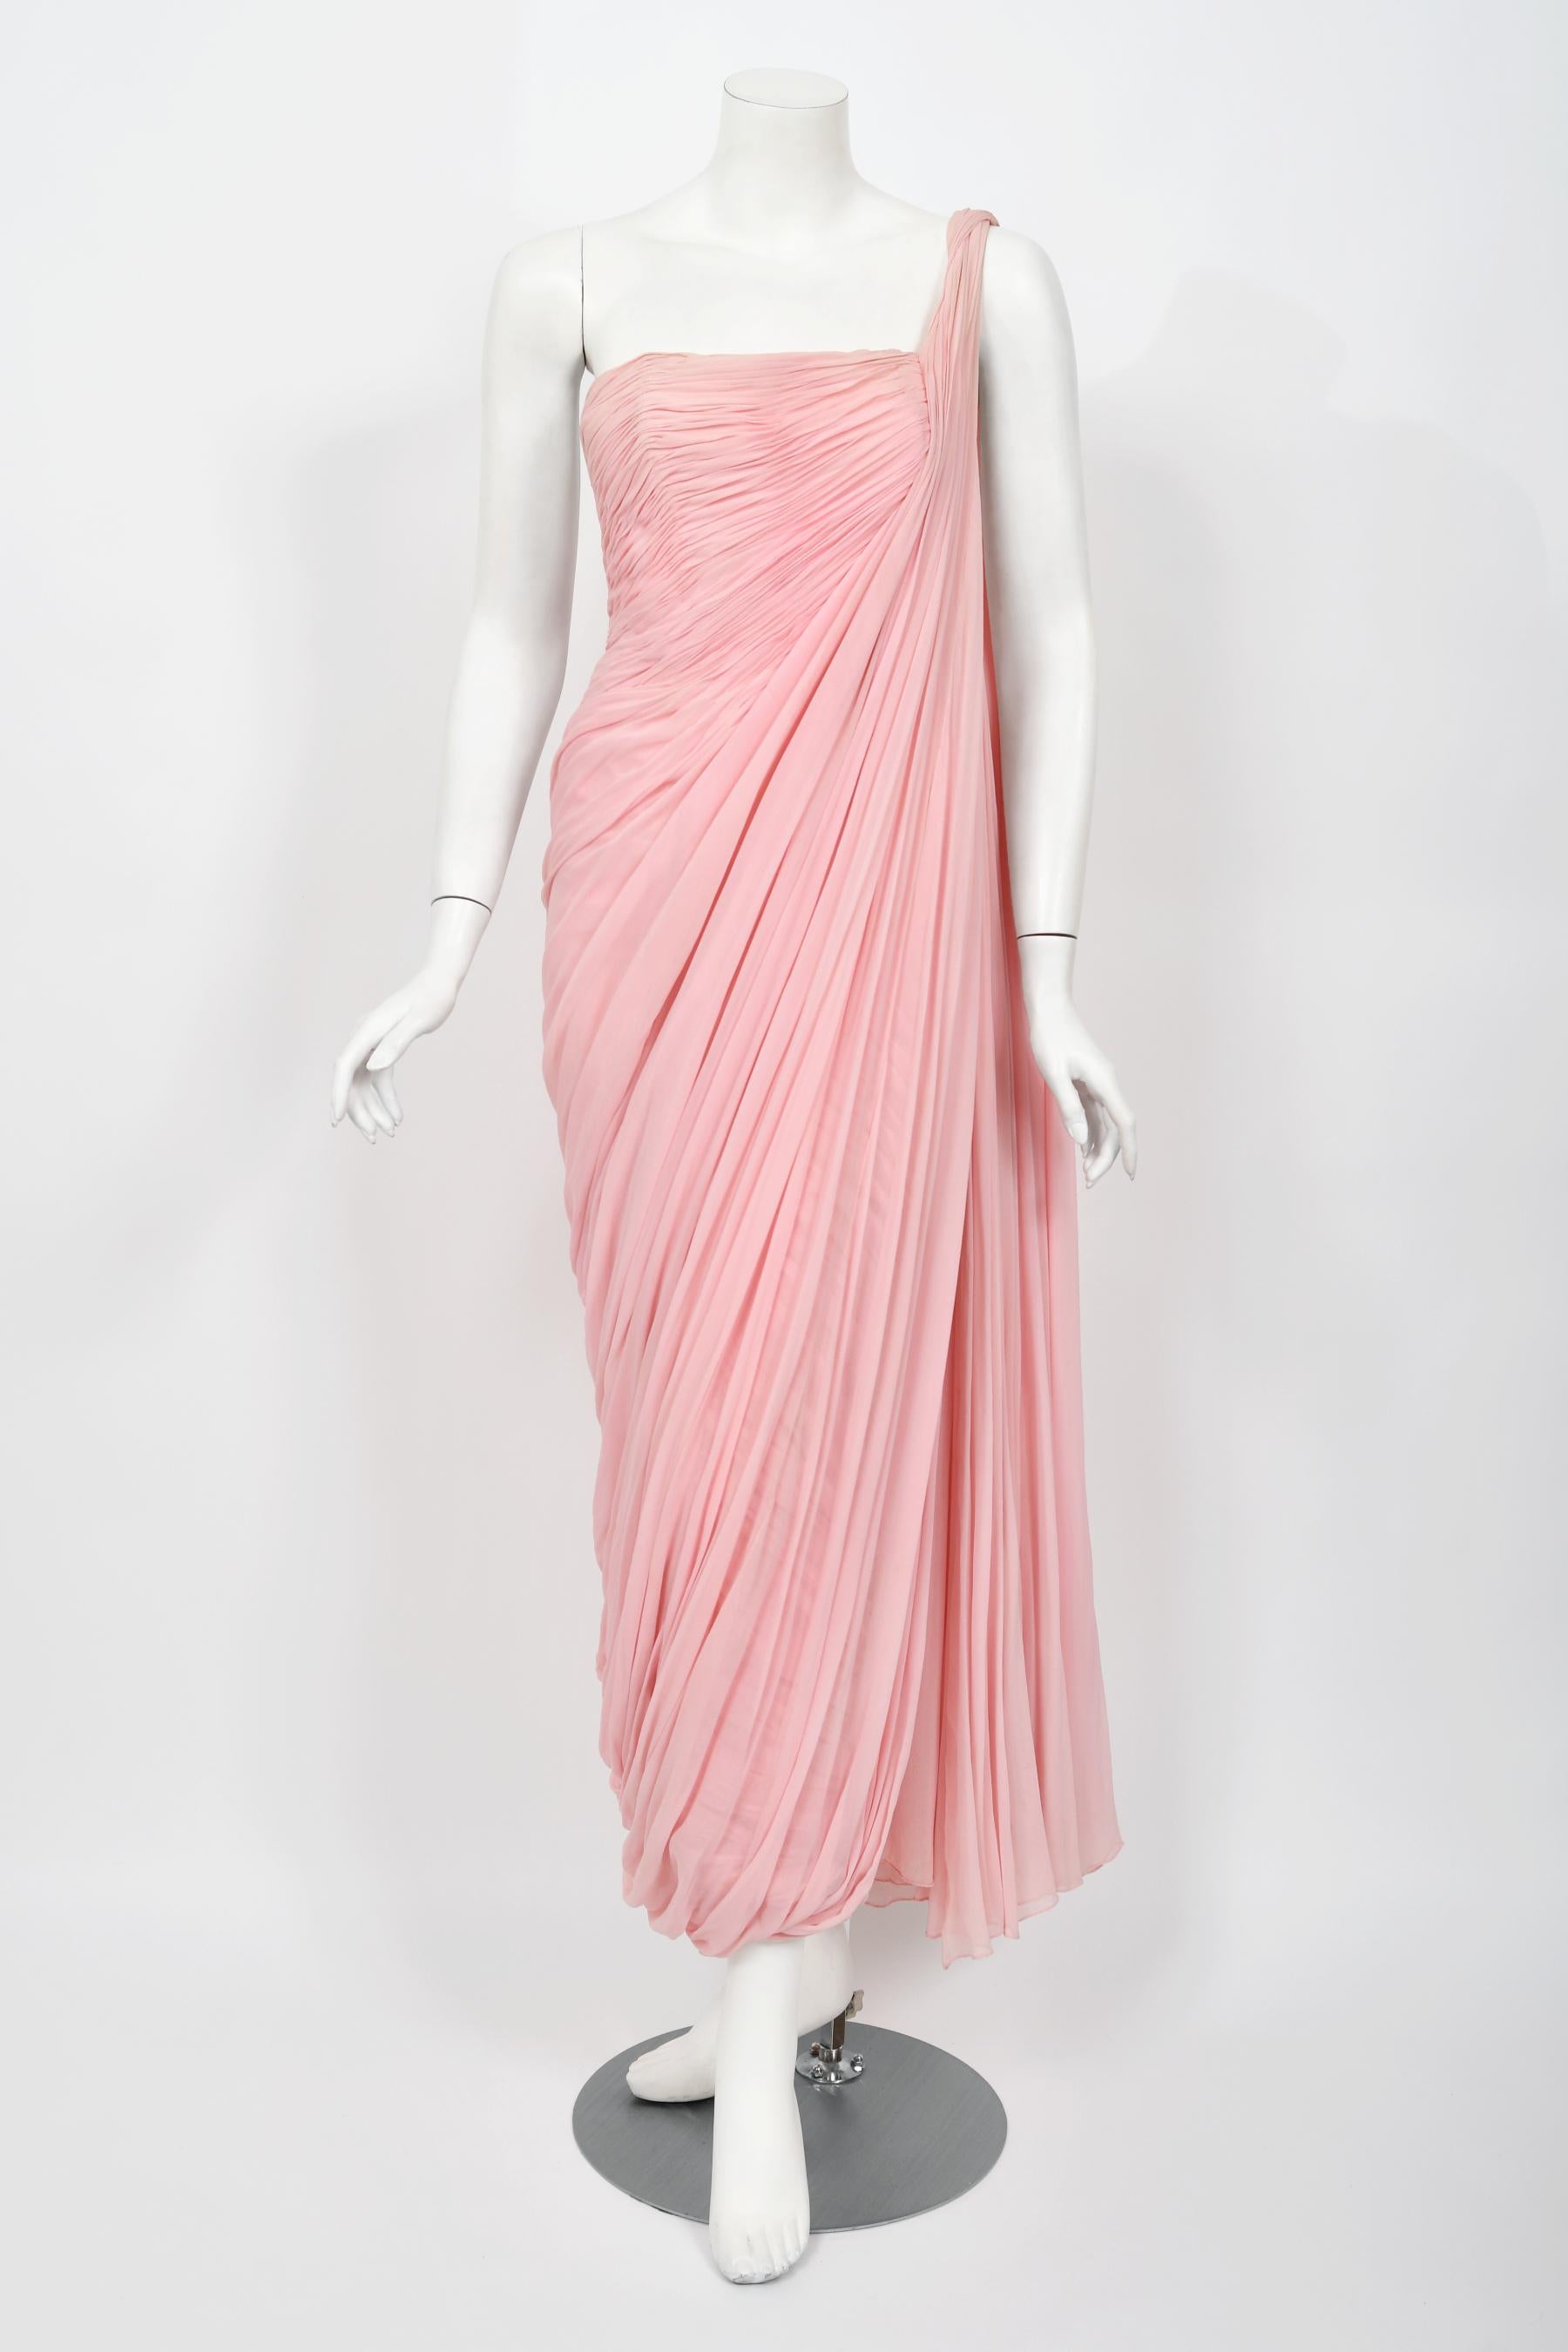 1958 Jean Dessès Haute Couture Documented Pink Ruched Silk Chiffon Goddess Gown For Sale 1